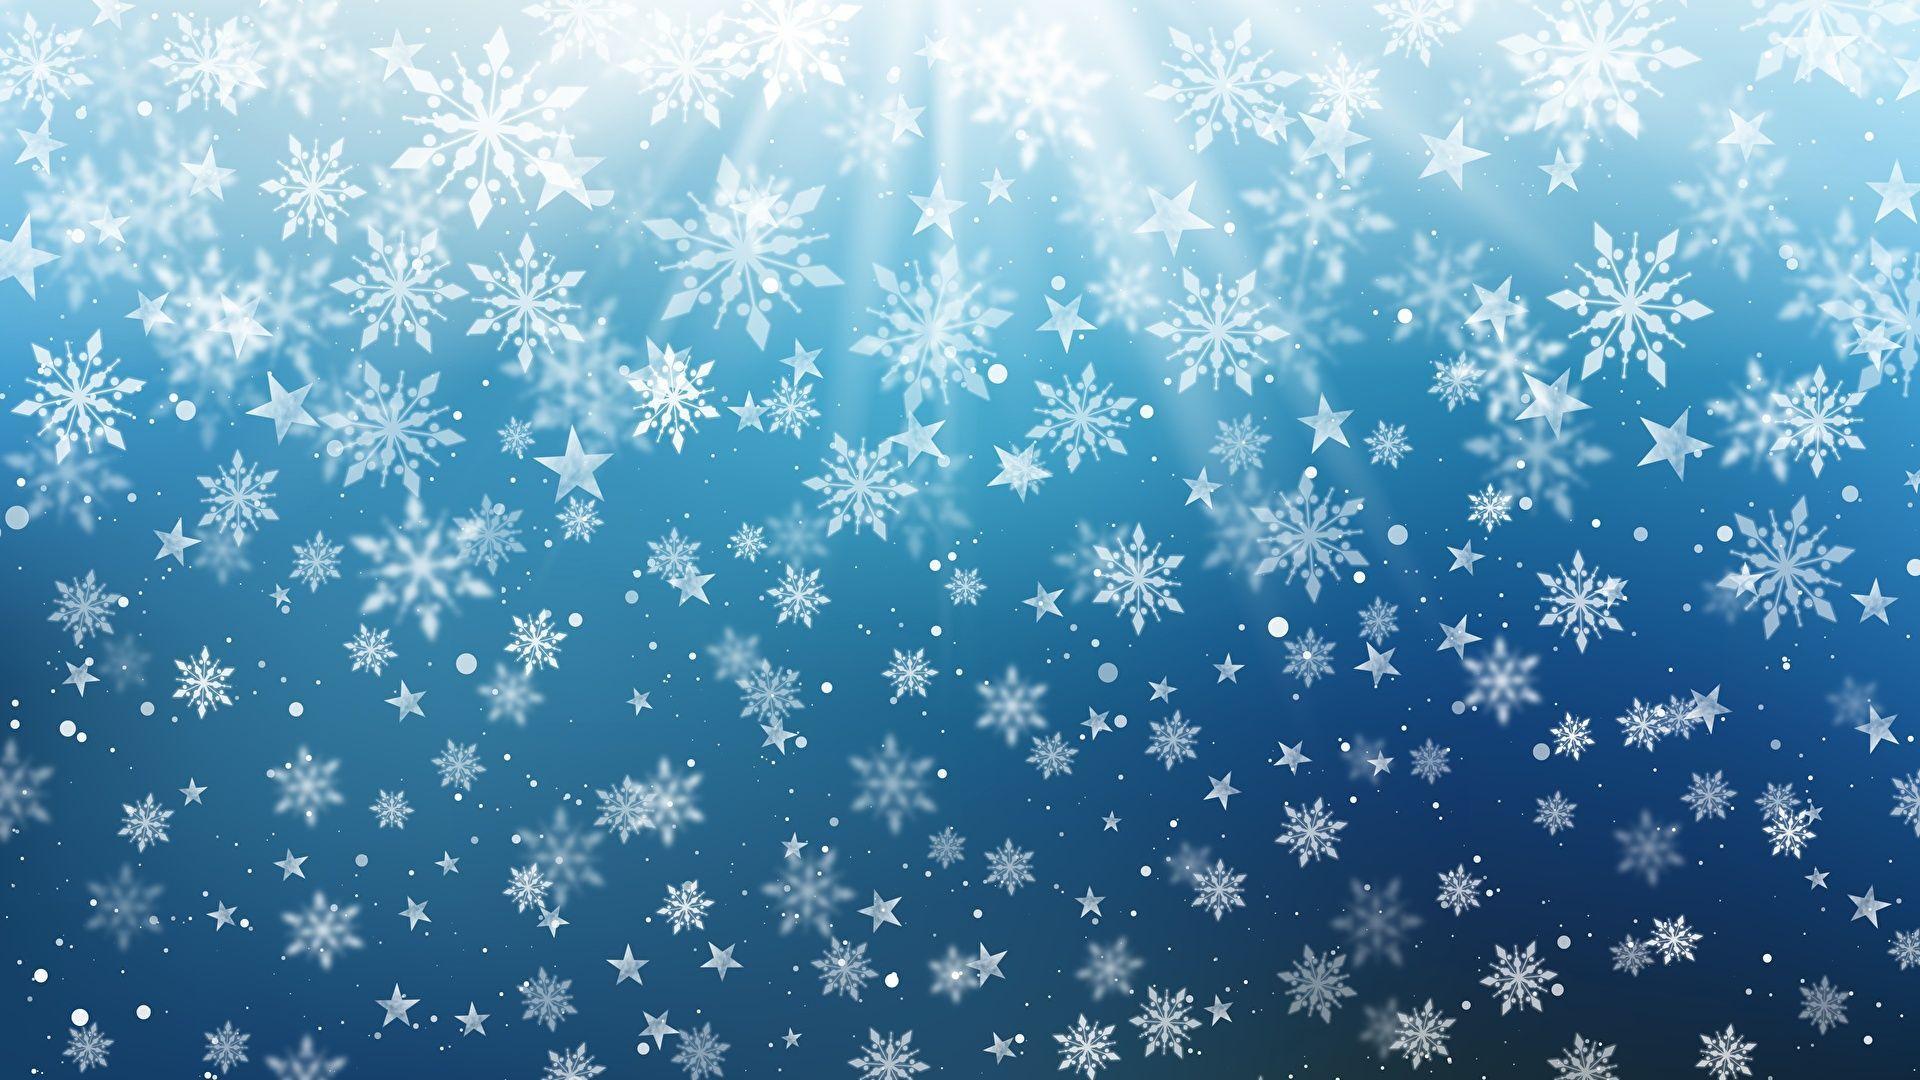 HD Snowflake Wallpapers - Top Free HD Snowflake Backgrounds ...